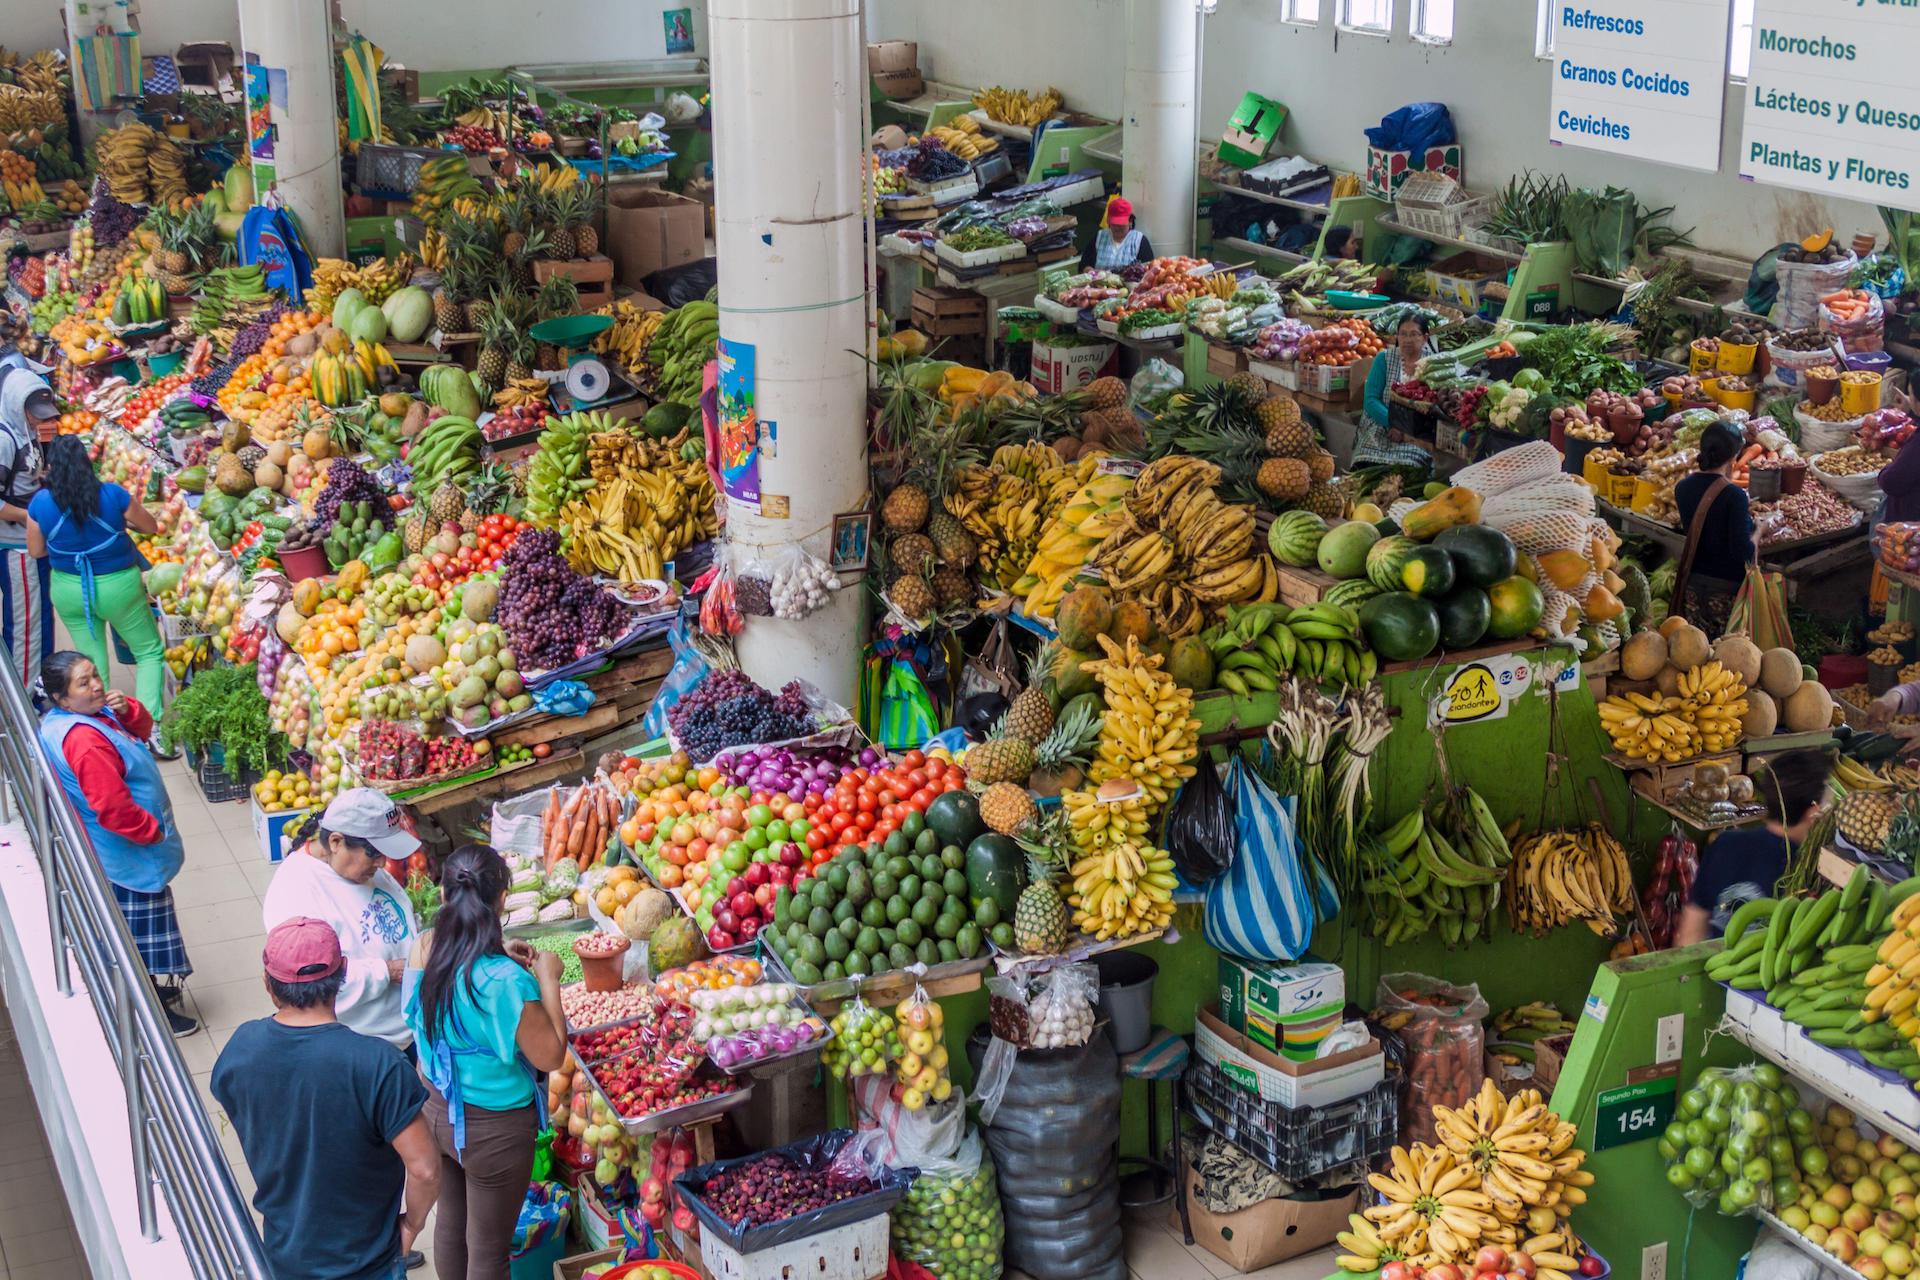 <p>A fruit stand at a street market in Ecuador. The UN Food Systems Summit aims to accelerate a positive transformation in the world food system, but different tensions may make the goal difficult to achieve. (Image: Kseniya Ragozina / Alamy)</p>